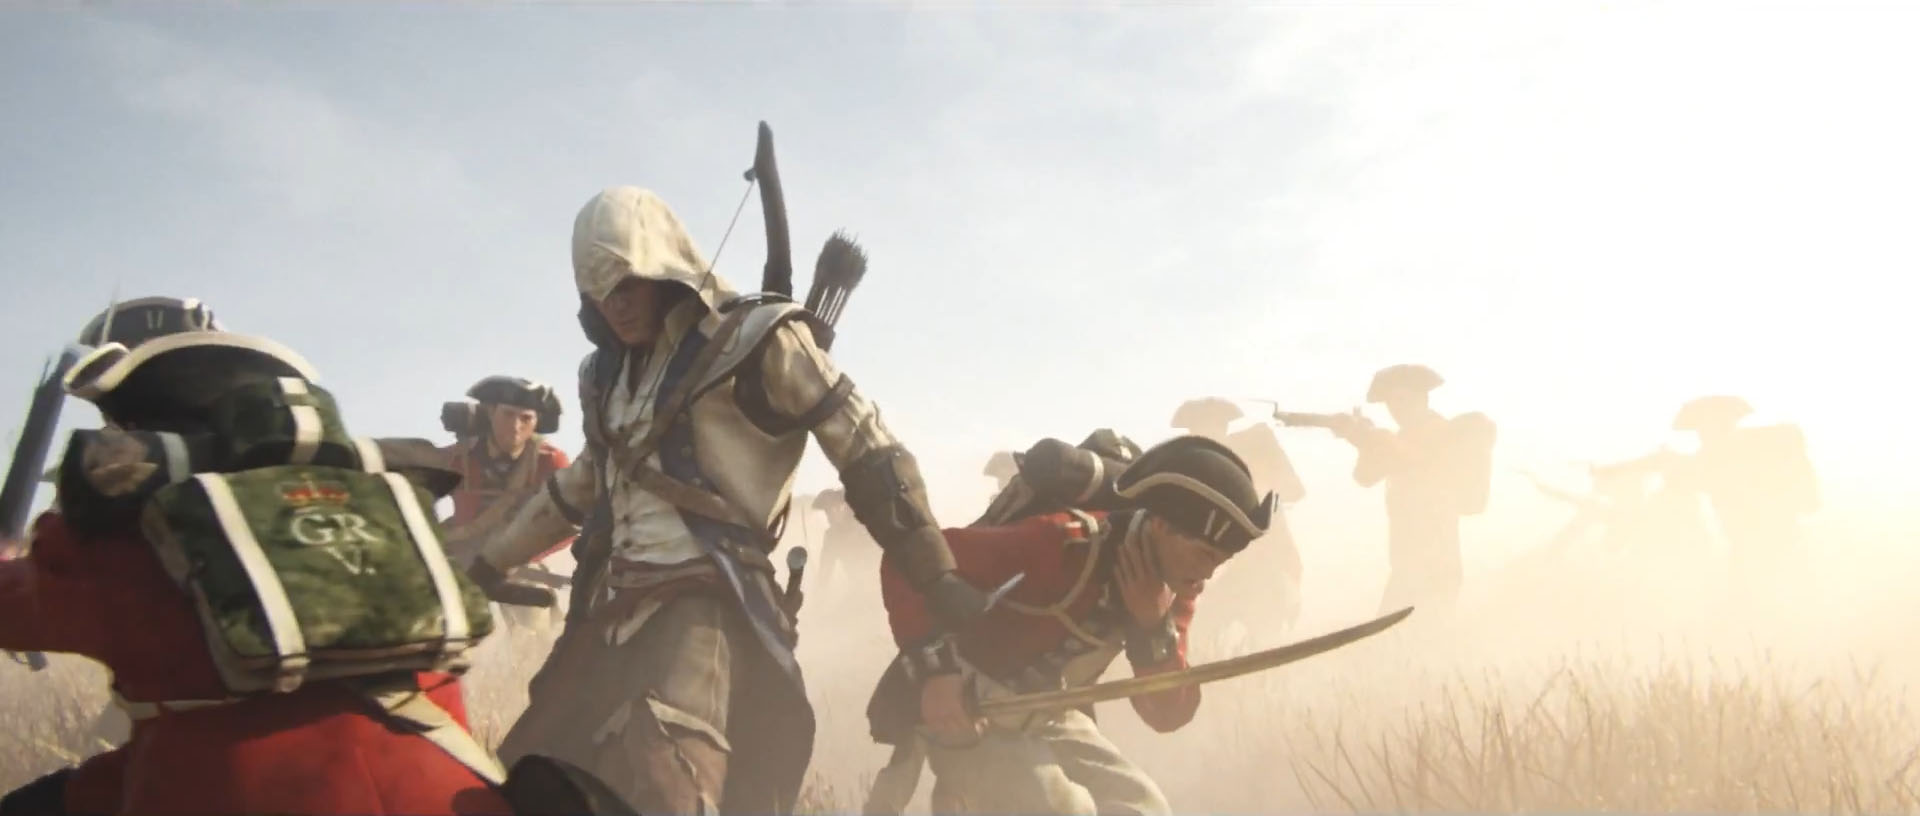 Assassin's Creed 3 - E3 Official Trailer [UK] 